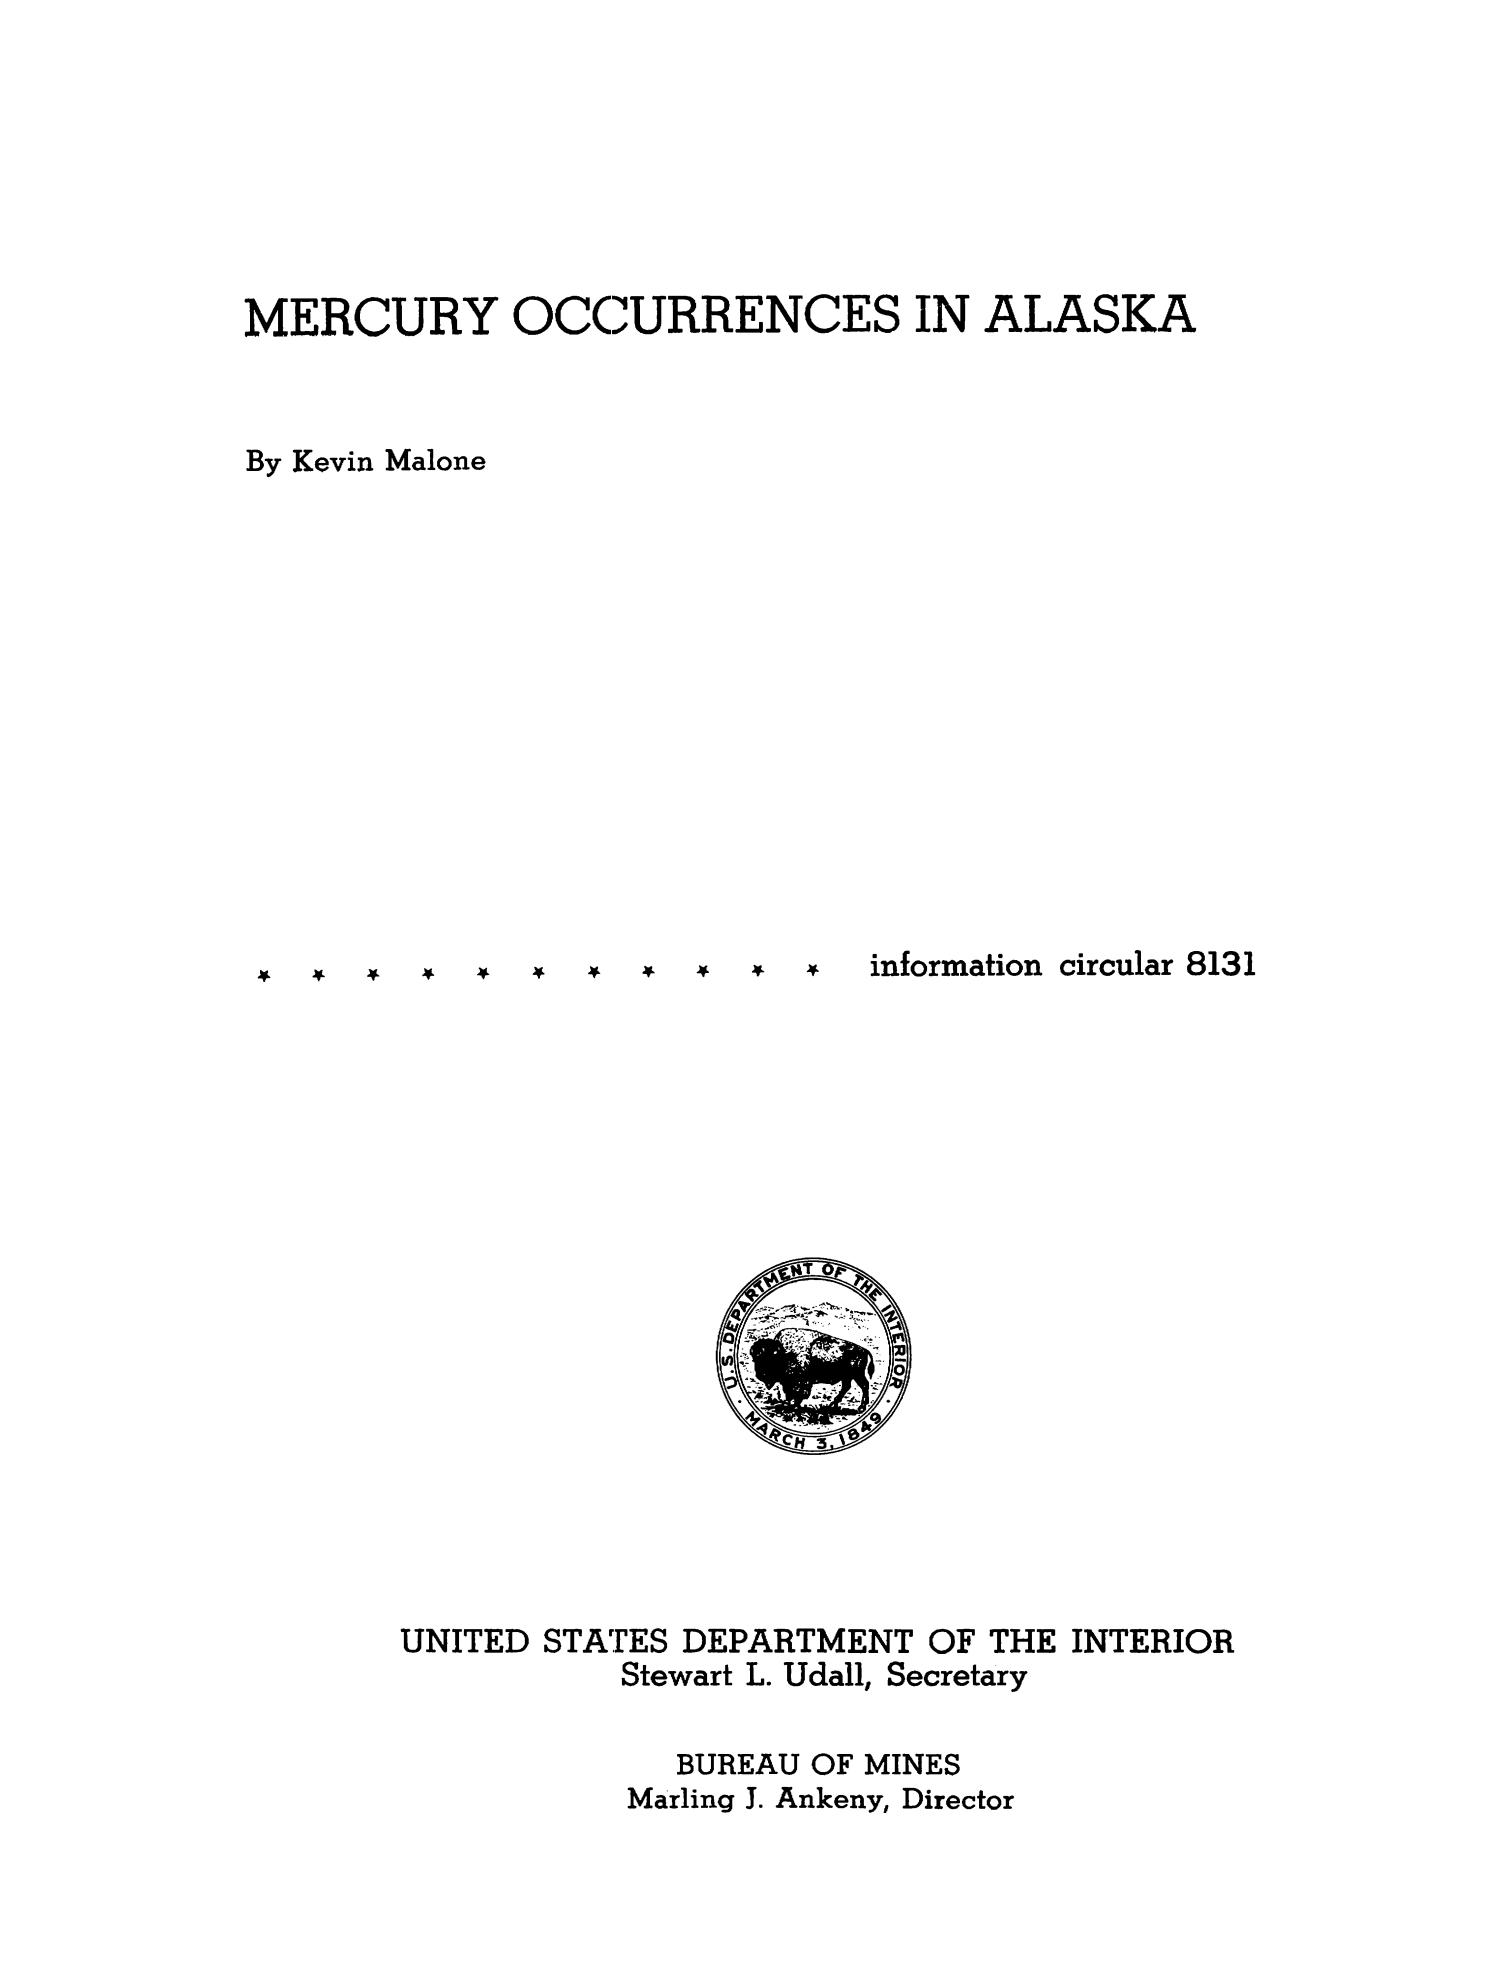 Mercury Occurrences in Alaska
                                                
                                                    Title Page
                                                